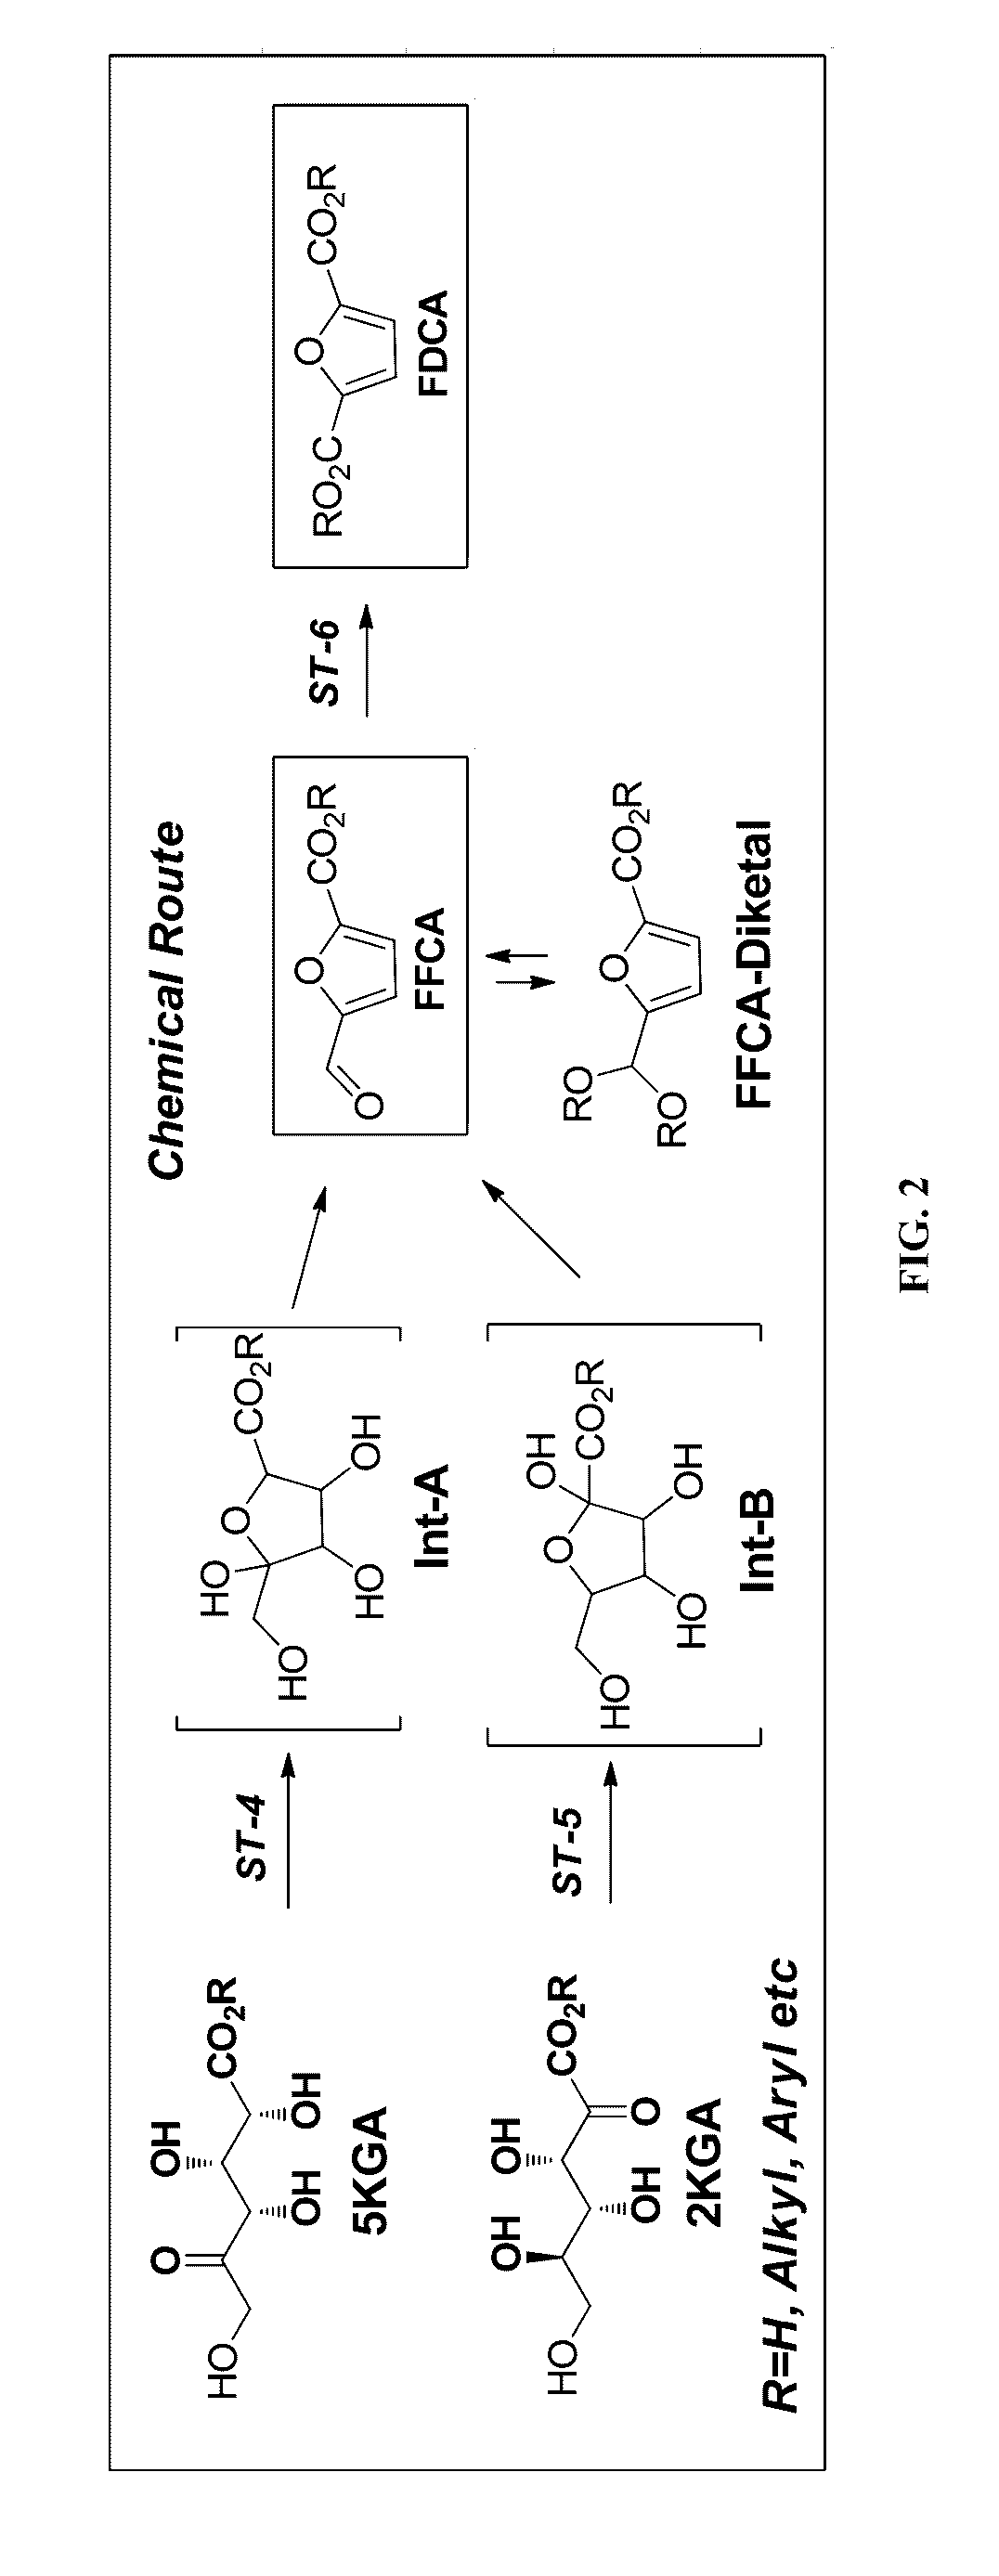 Synthesis of FDCA and FDCA precursors from gluconic acid derivatives